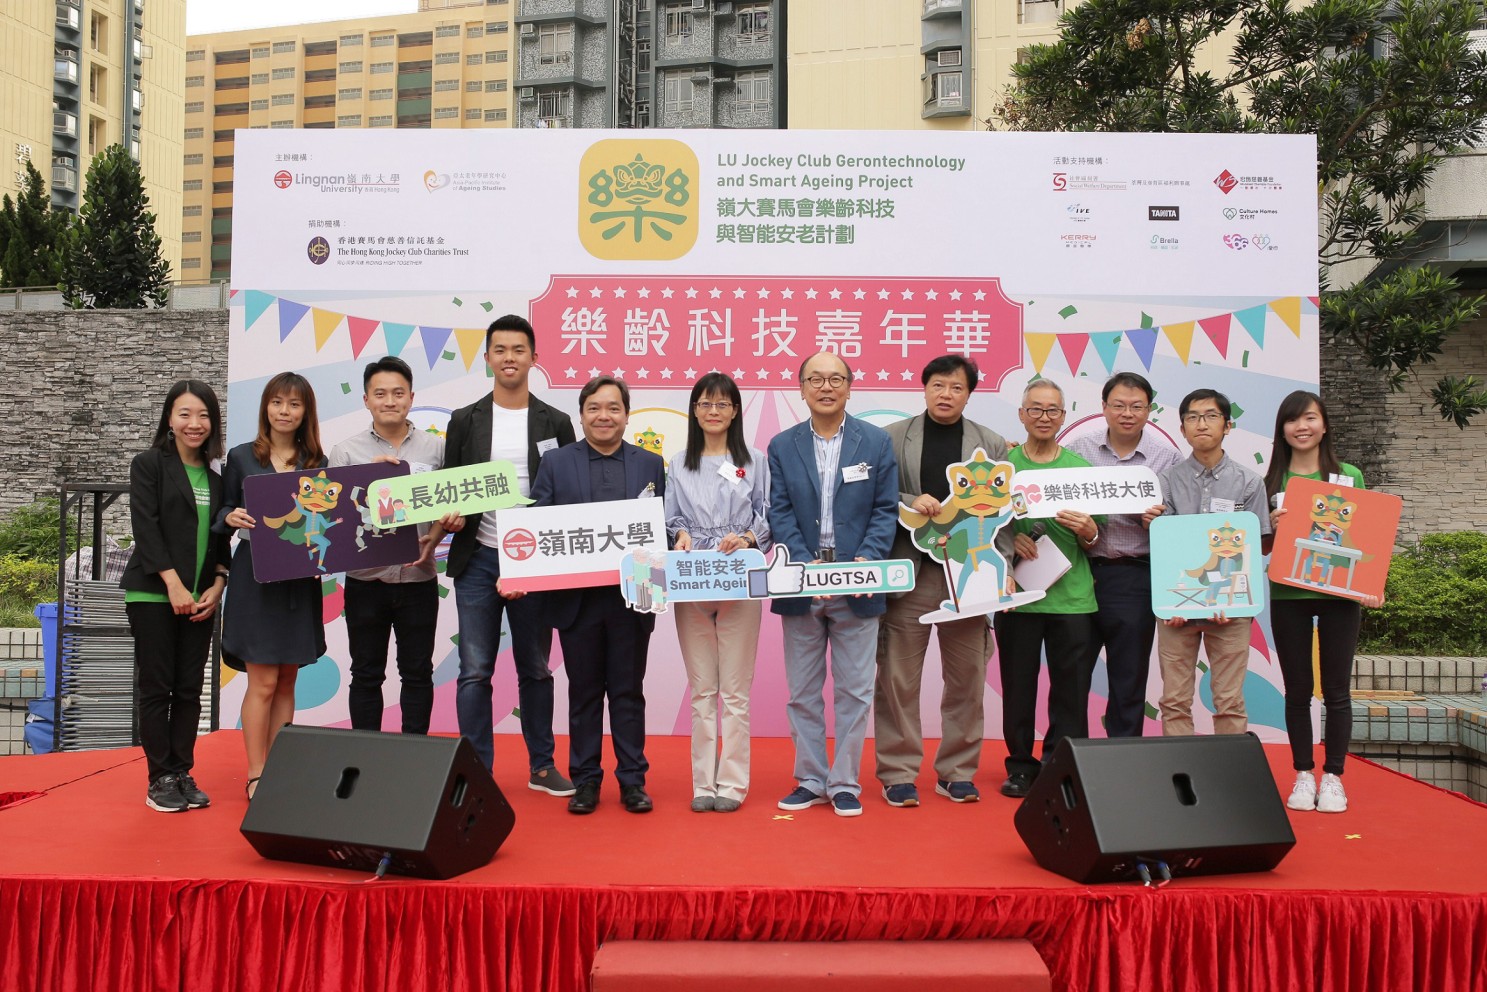 LU holds Gerontech Carnival to promote gerontechnology and smart ageing